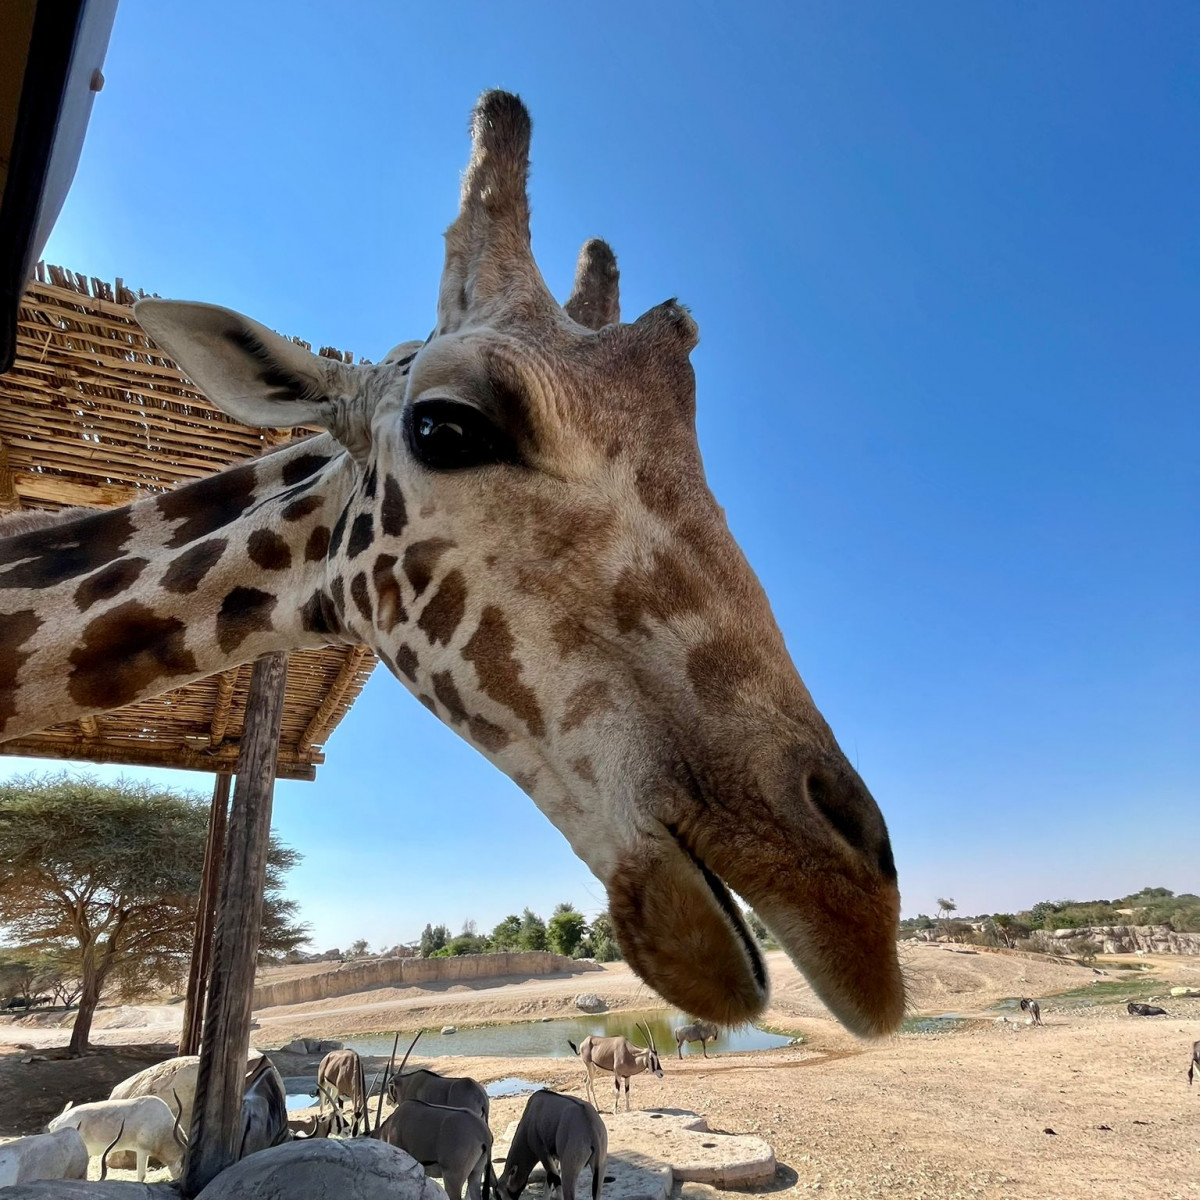 As part of the Al Ain Safari experience, visitors are given carrots to feed to giraffes. [TNA]